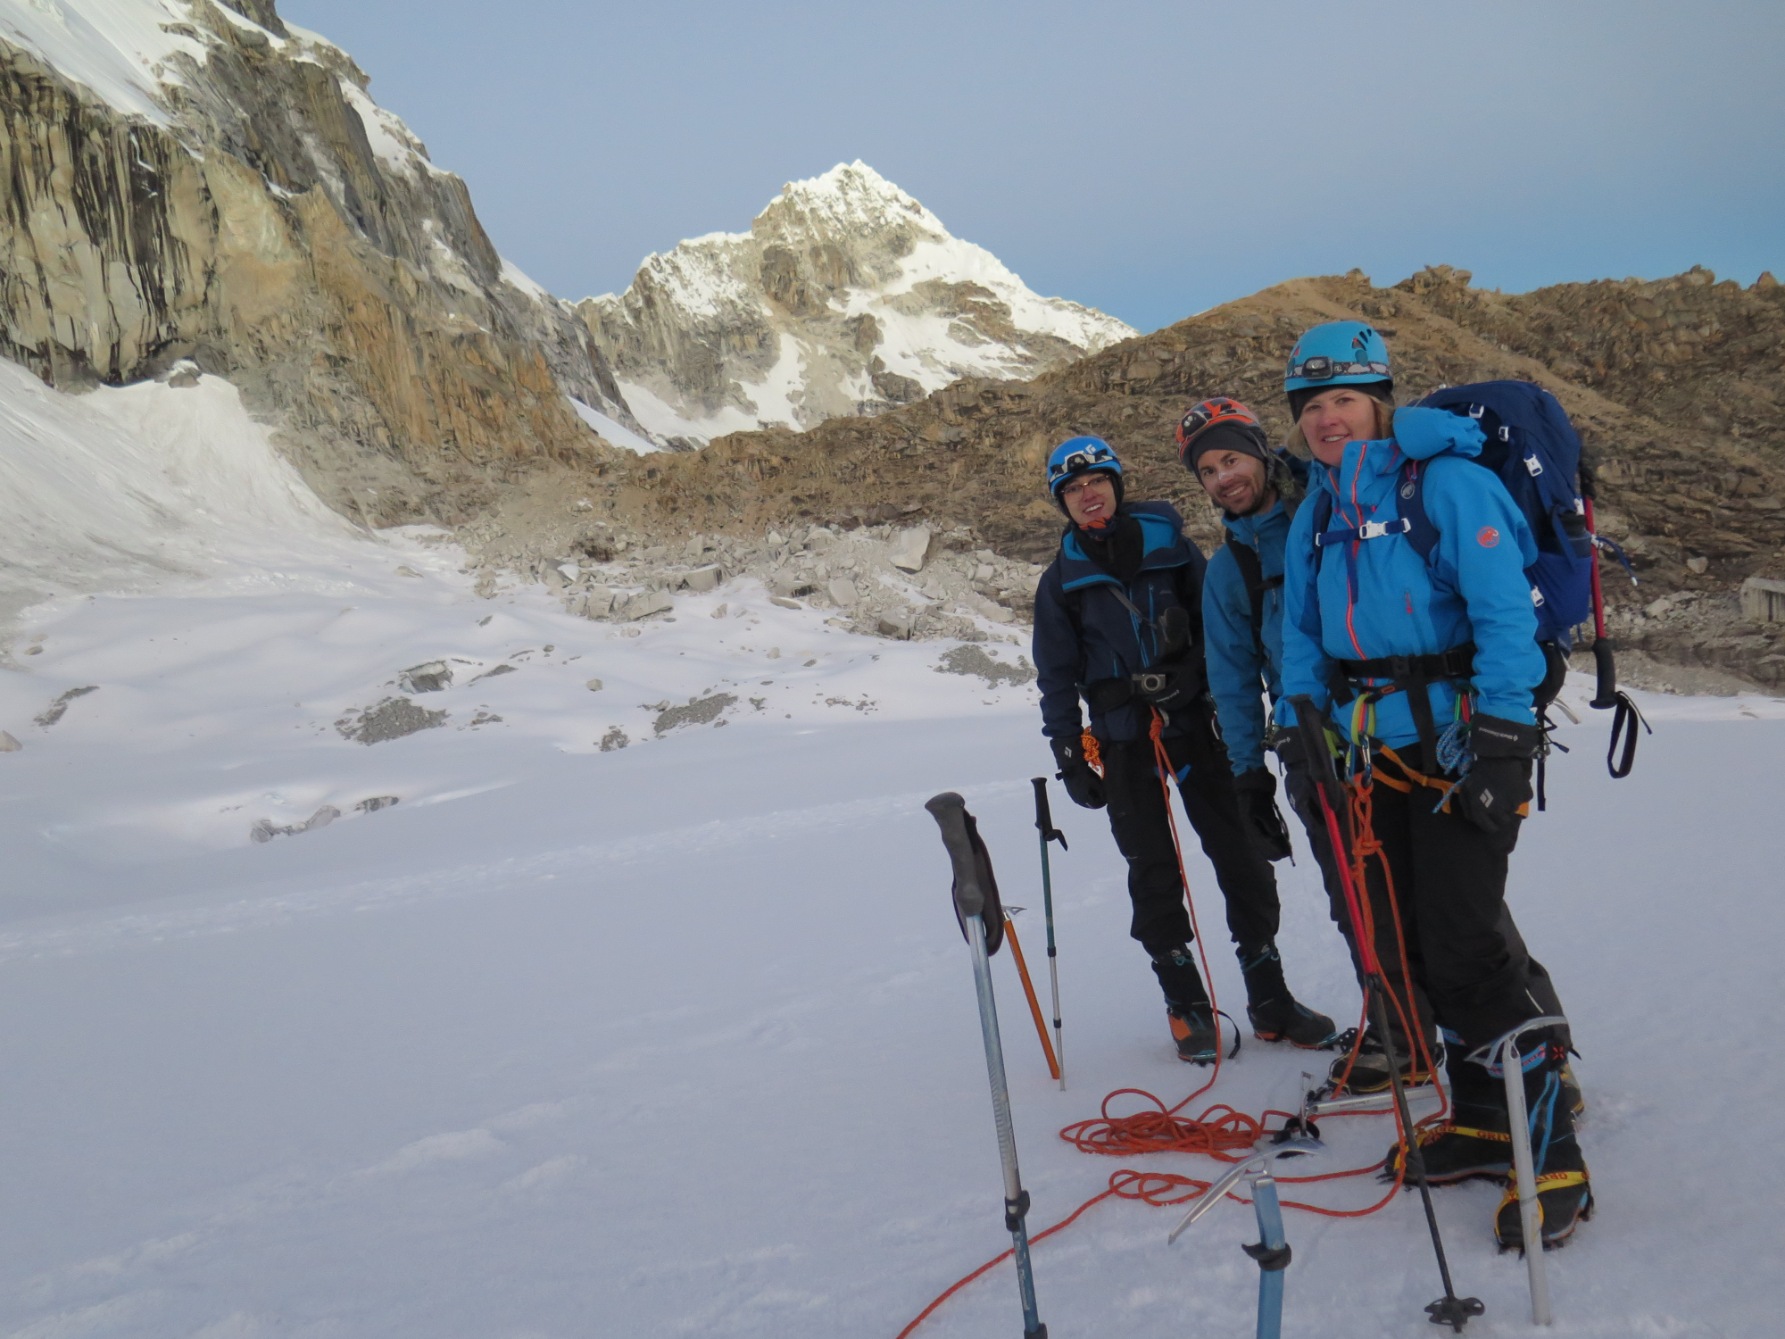 "Join Peru Climbing School by Alpenglow Expeditions to develop high-altitude mountaineering skills in one of the most stunning mountain ranges on the planet. Small team size and a low ratio of climbers to guides (3:1) make it a perfect learning environment to hone in on skills and set yourself up for success on bigger mountains around the world."